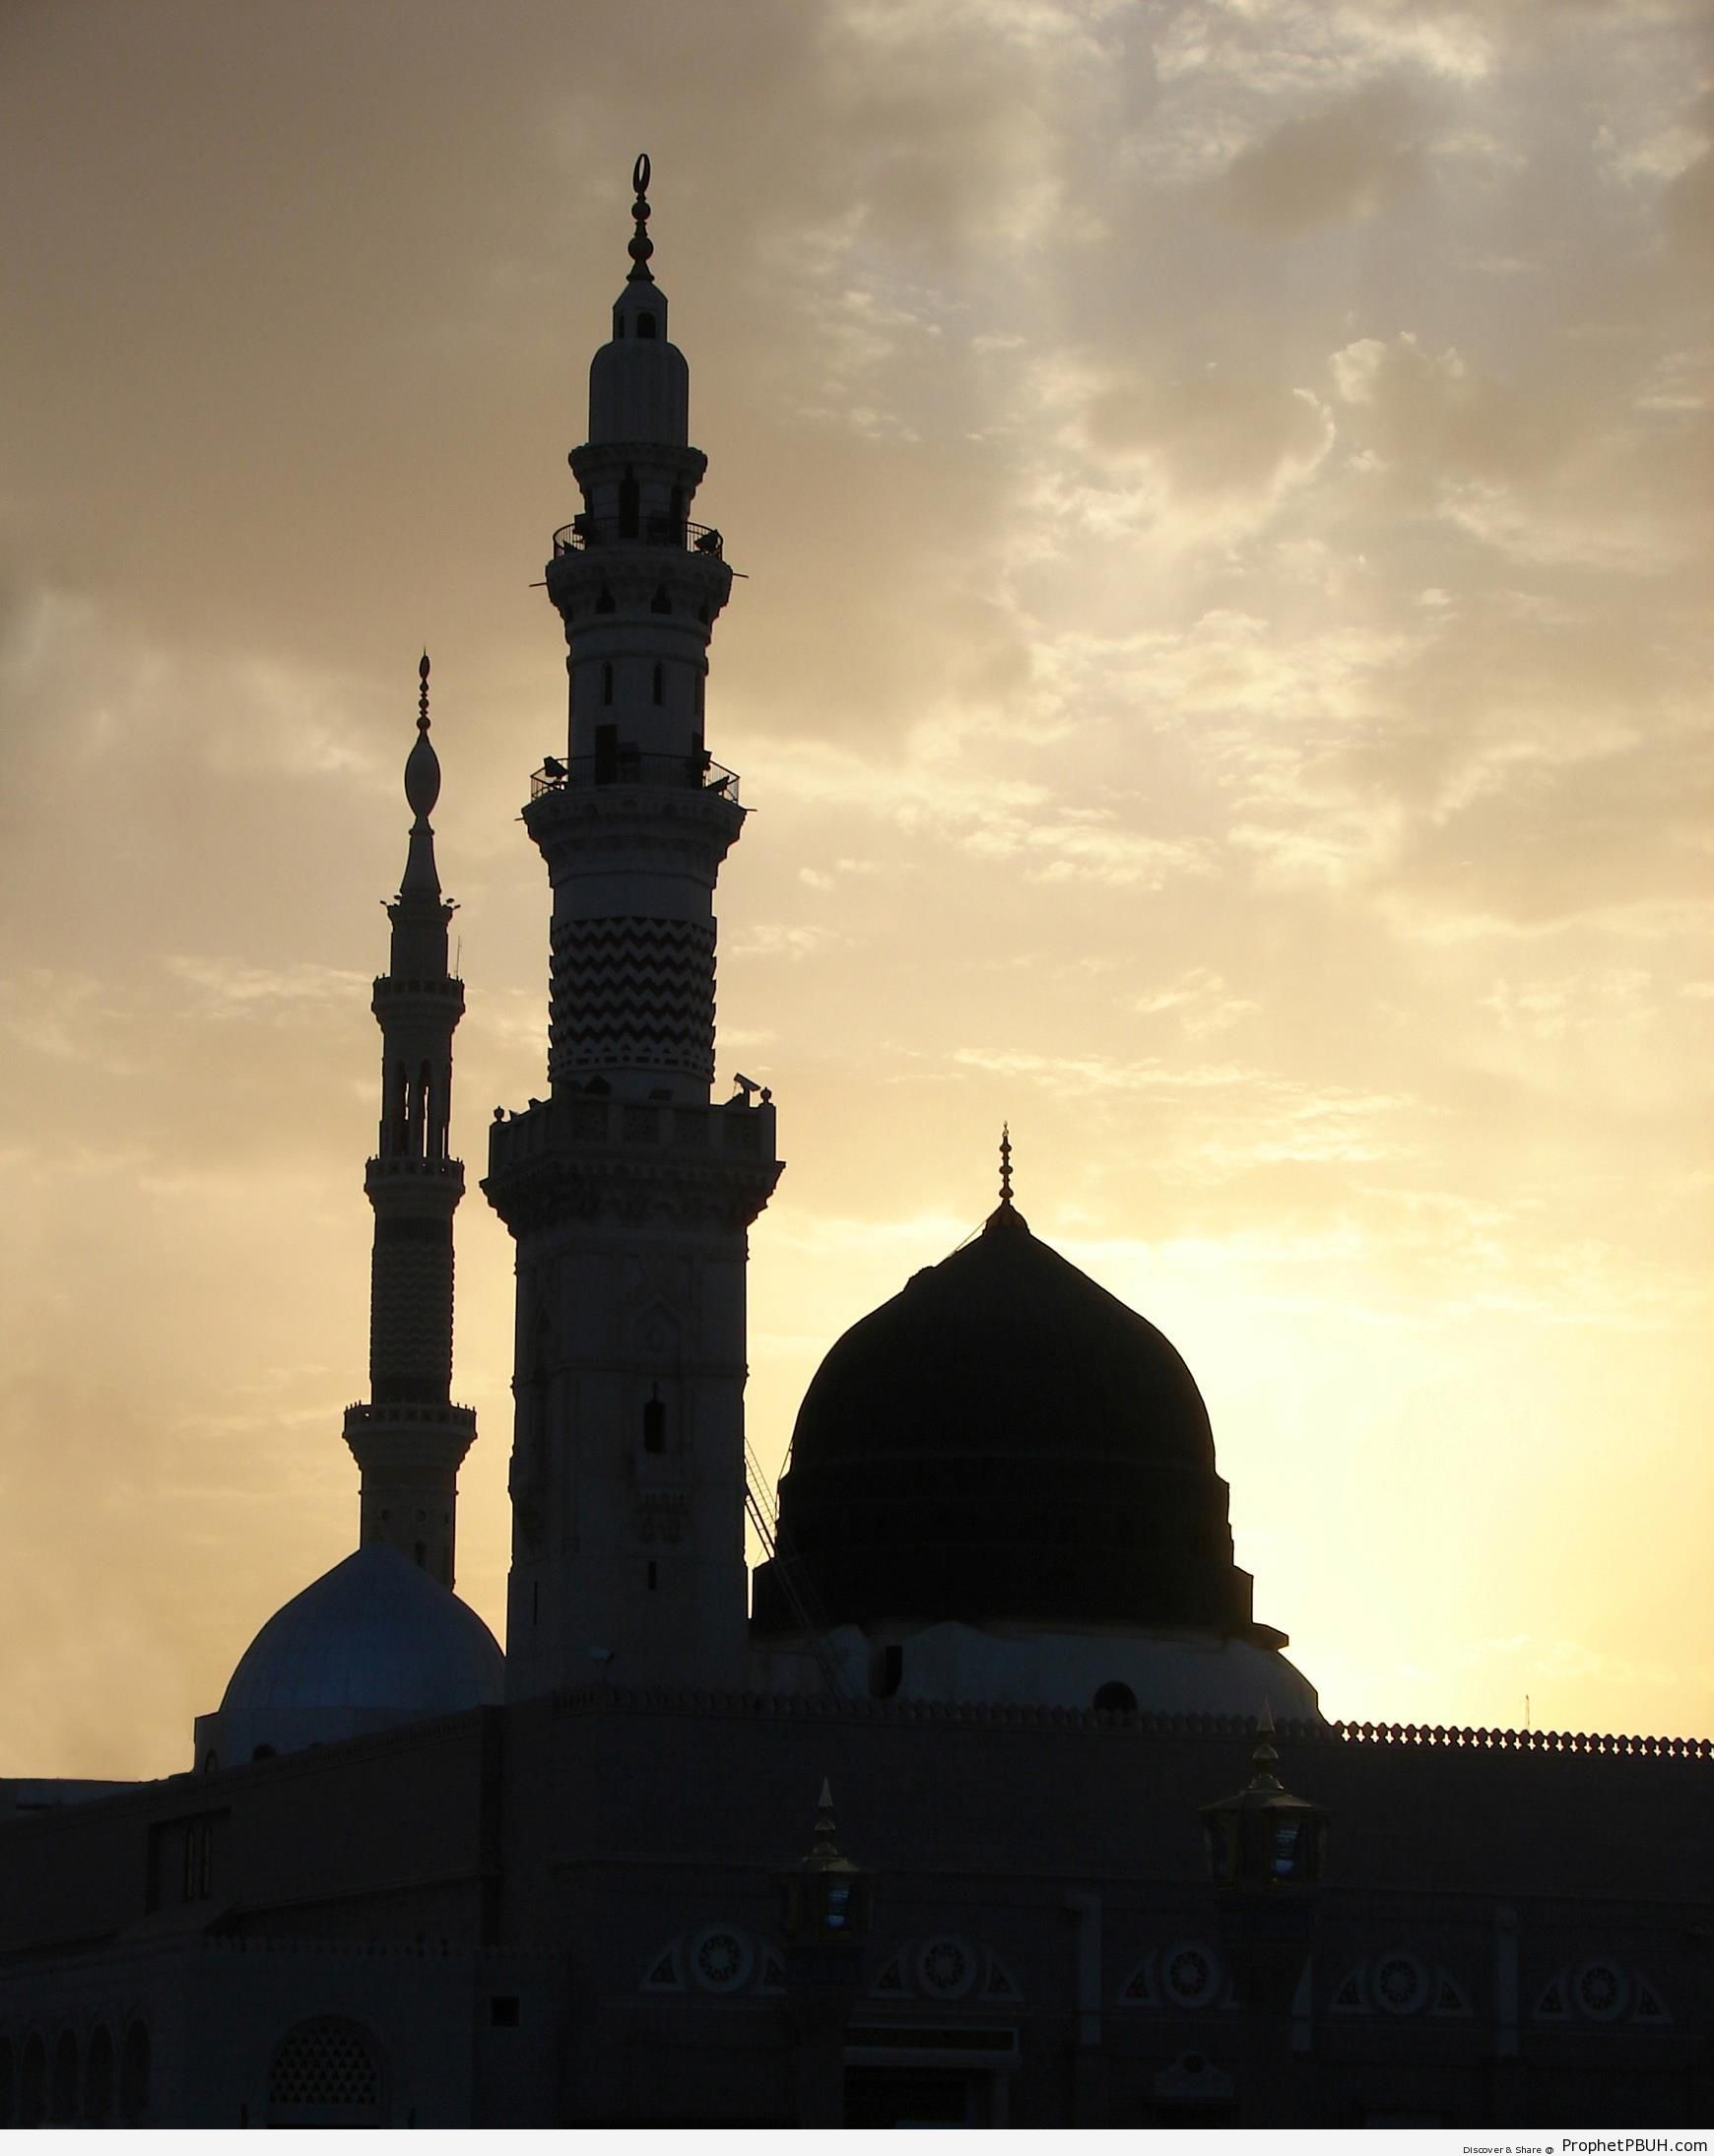 Silhouette of the Mosque of the Prophet (Madinah, Saudi Arabia) - Al-Masjid an-Nabawi (The Prophets Mosque) in Madinah, Saudi Arabia -Picture